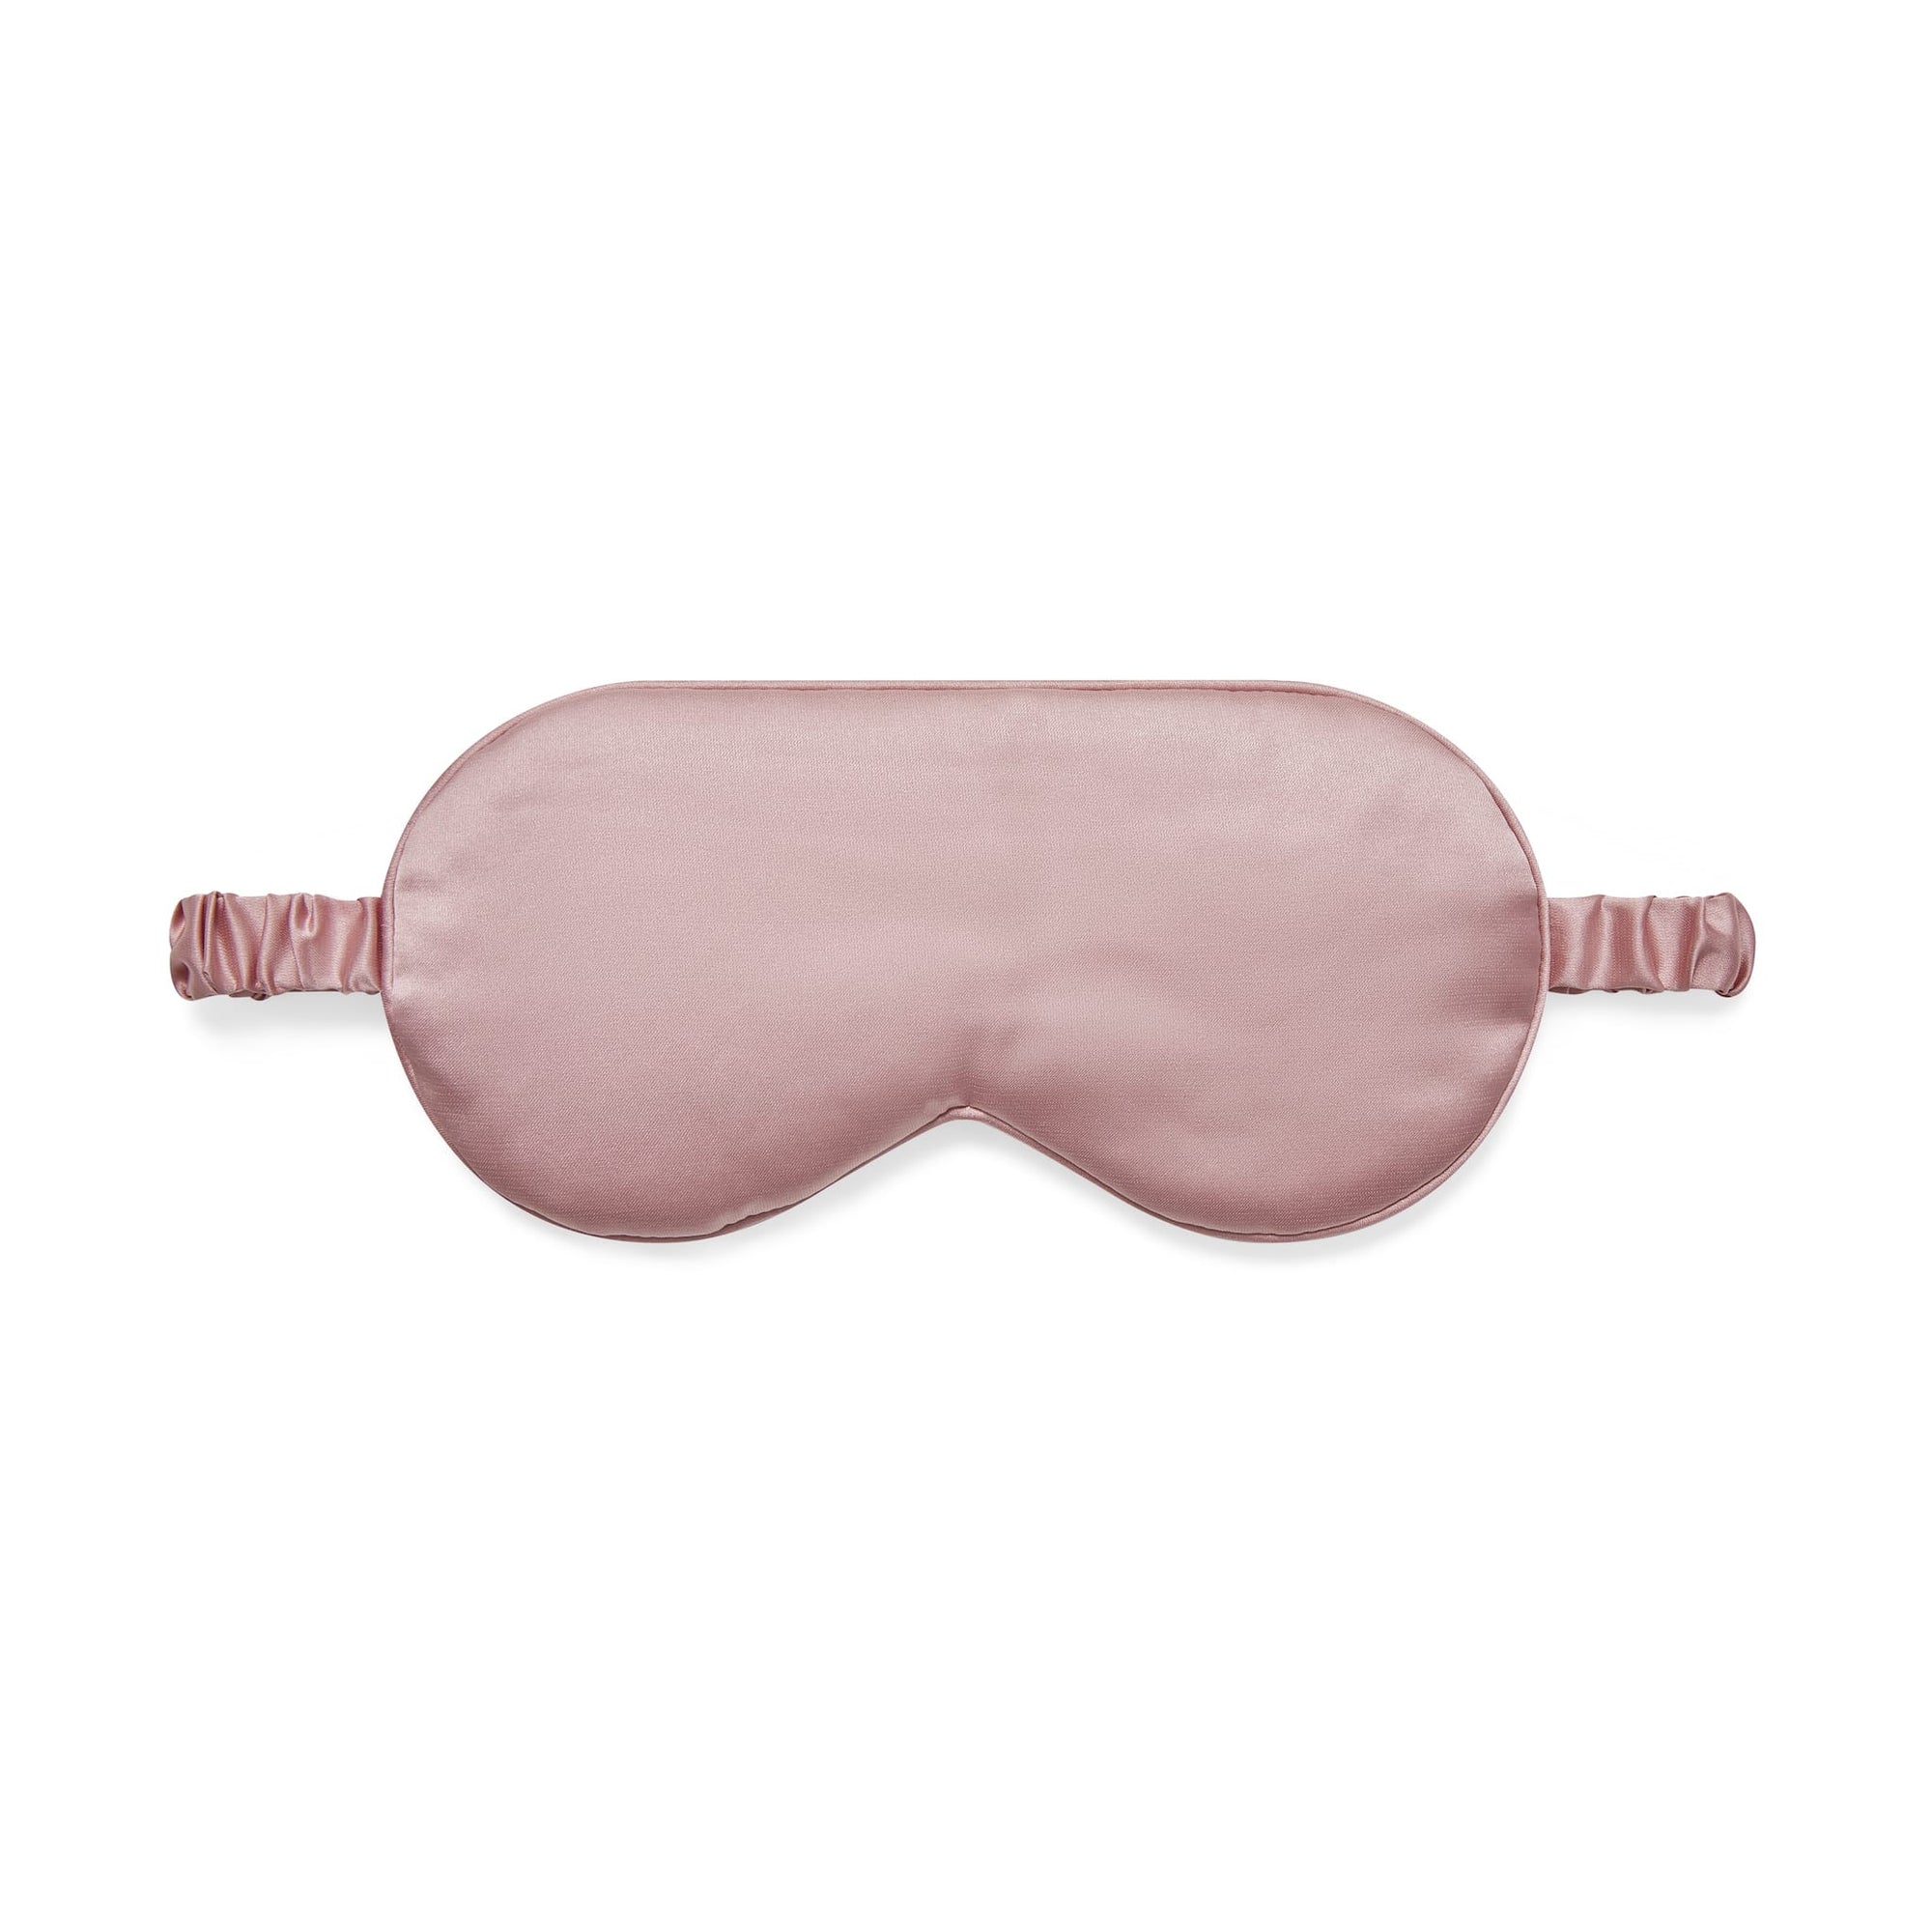 Only Curls Eye Mask and Sleep Turban Set - Dusty Rose - Only Curls